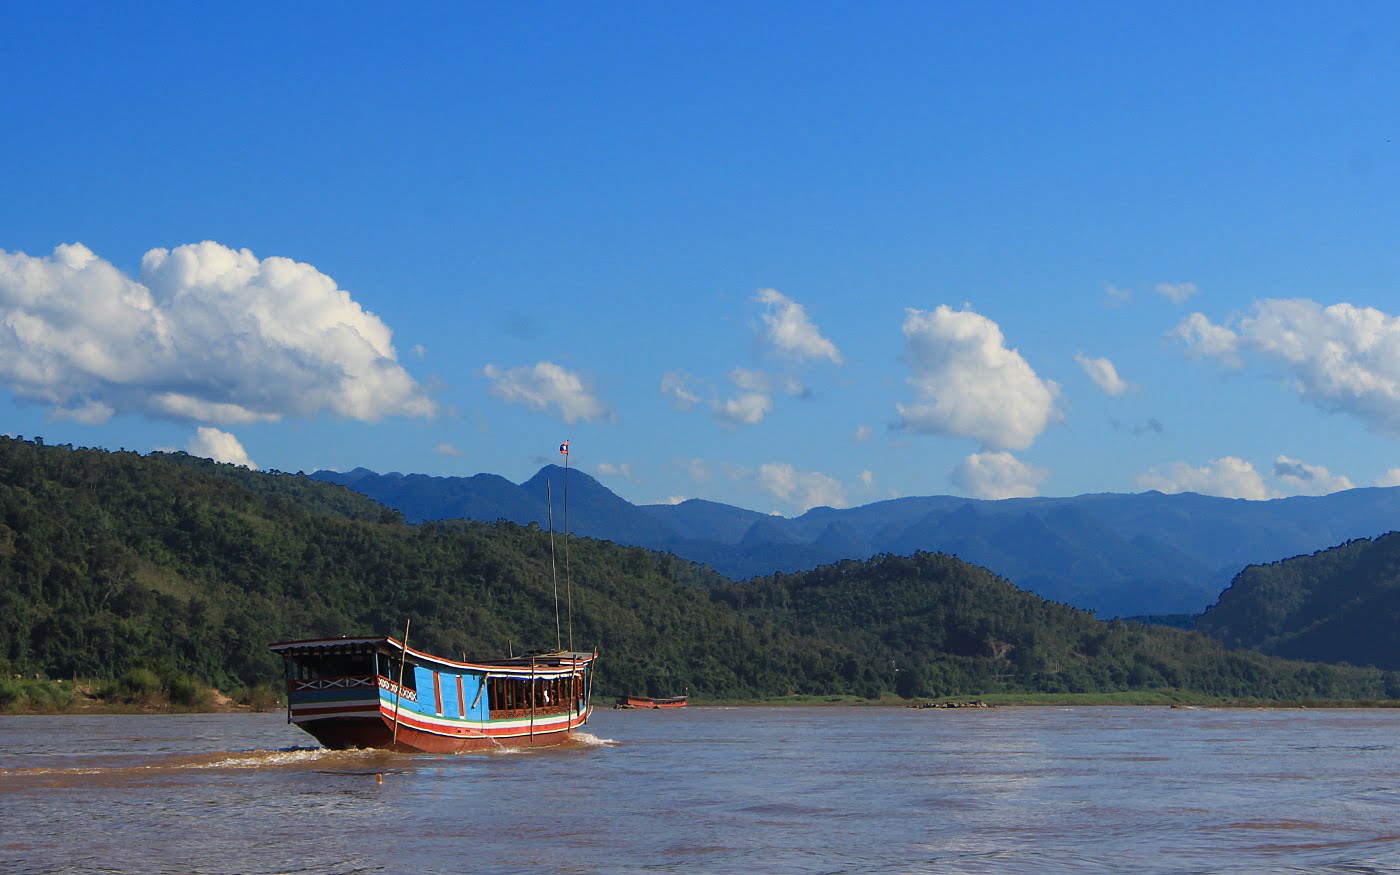 Slow boat from Luang Prabang to Huay Xai. A slow boat on the Mekong river..